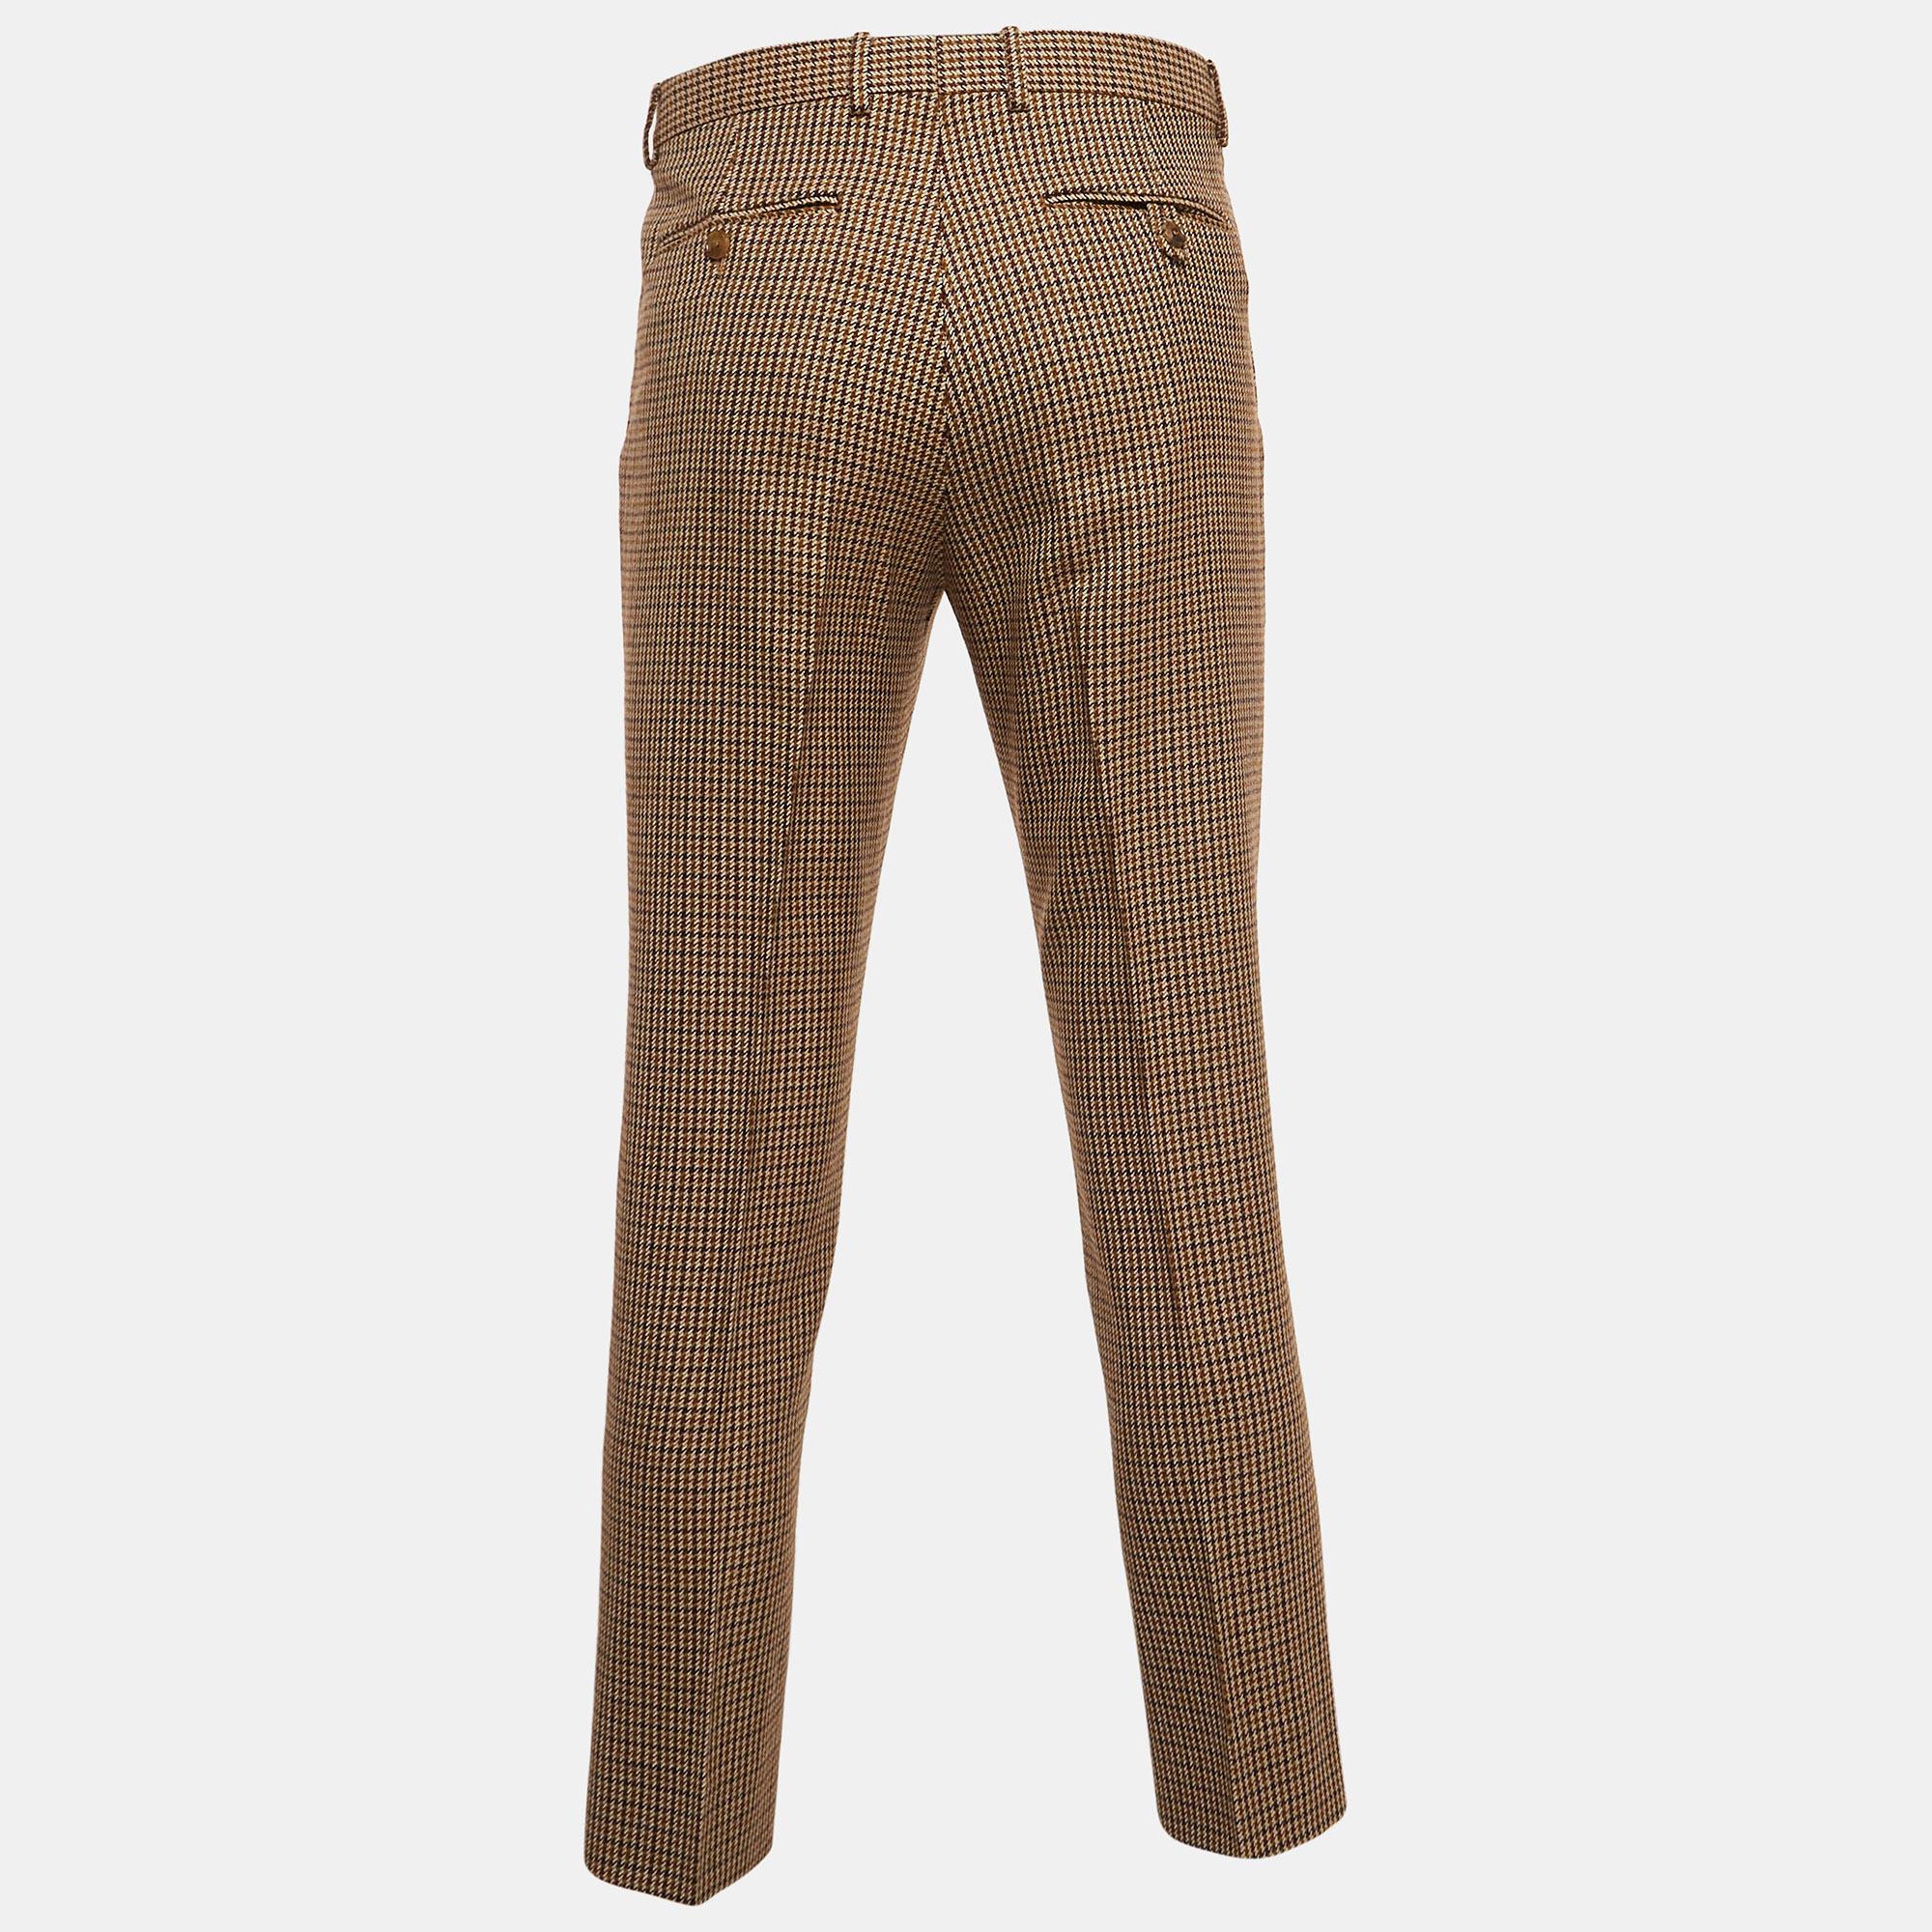 Enhance your formal attire with this pair of Gucci trousers. Designed into a superb silhouette and fit, this pair of trousers will definitely make you look elegant.

